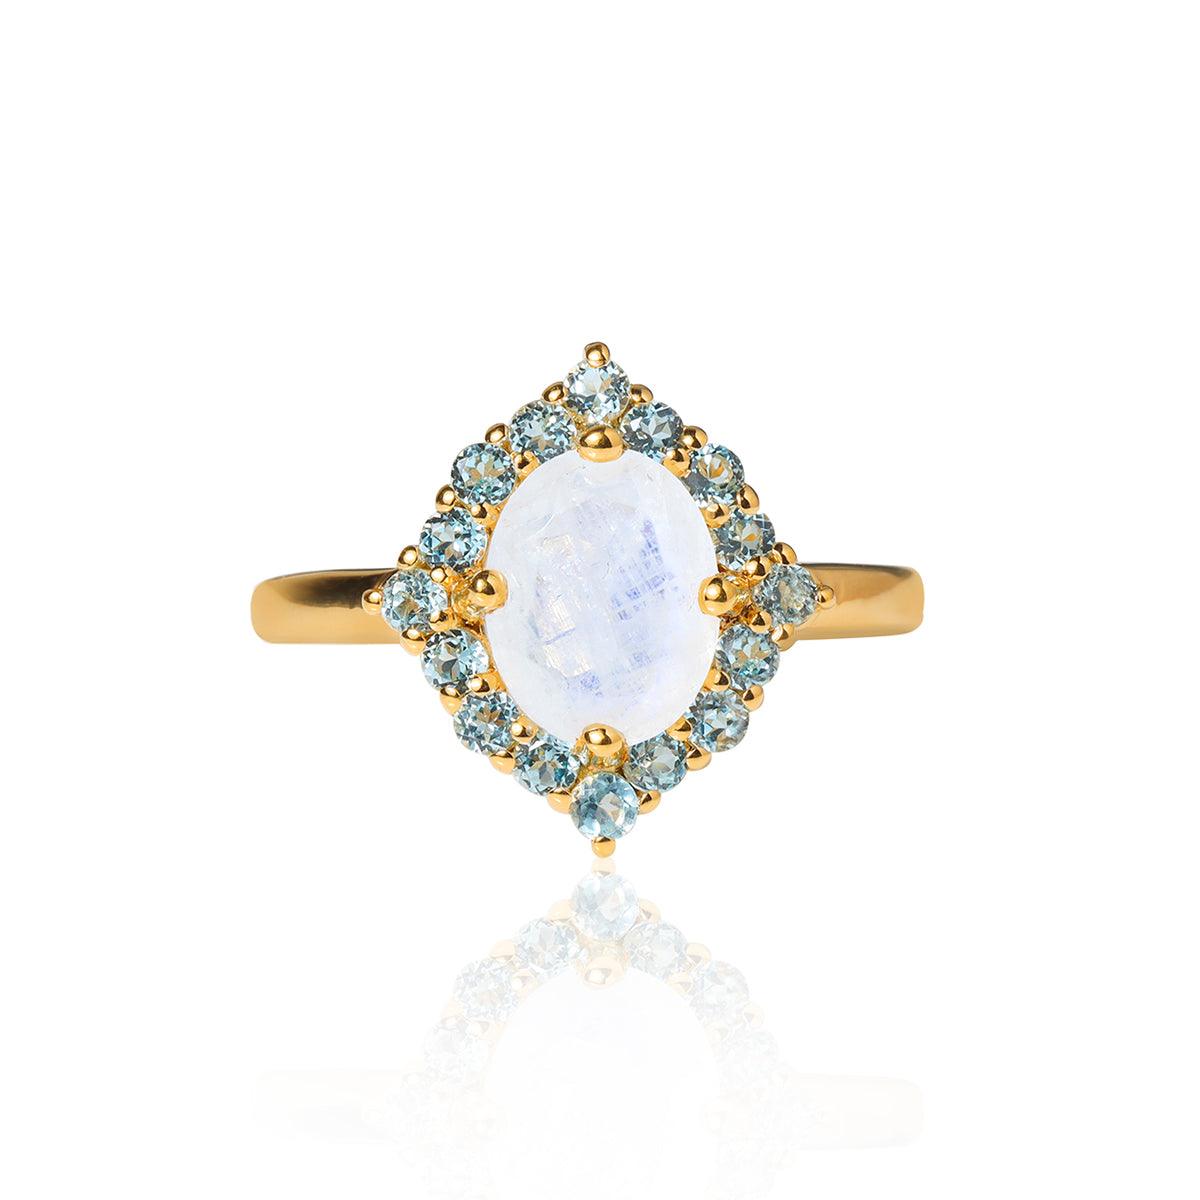 Rainbow Moonstone & Blue Topaz Ring in 14k Gold Over 925 Sterling Silver - YoTreasure